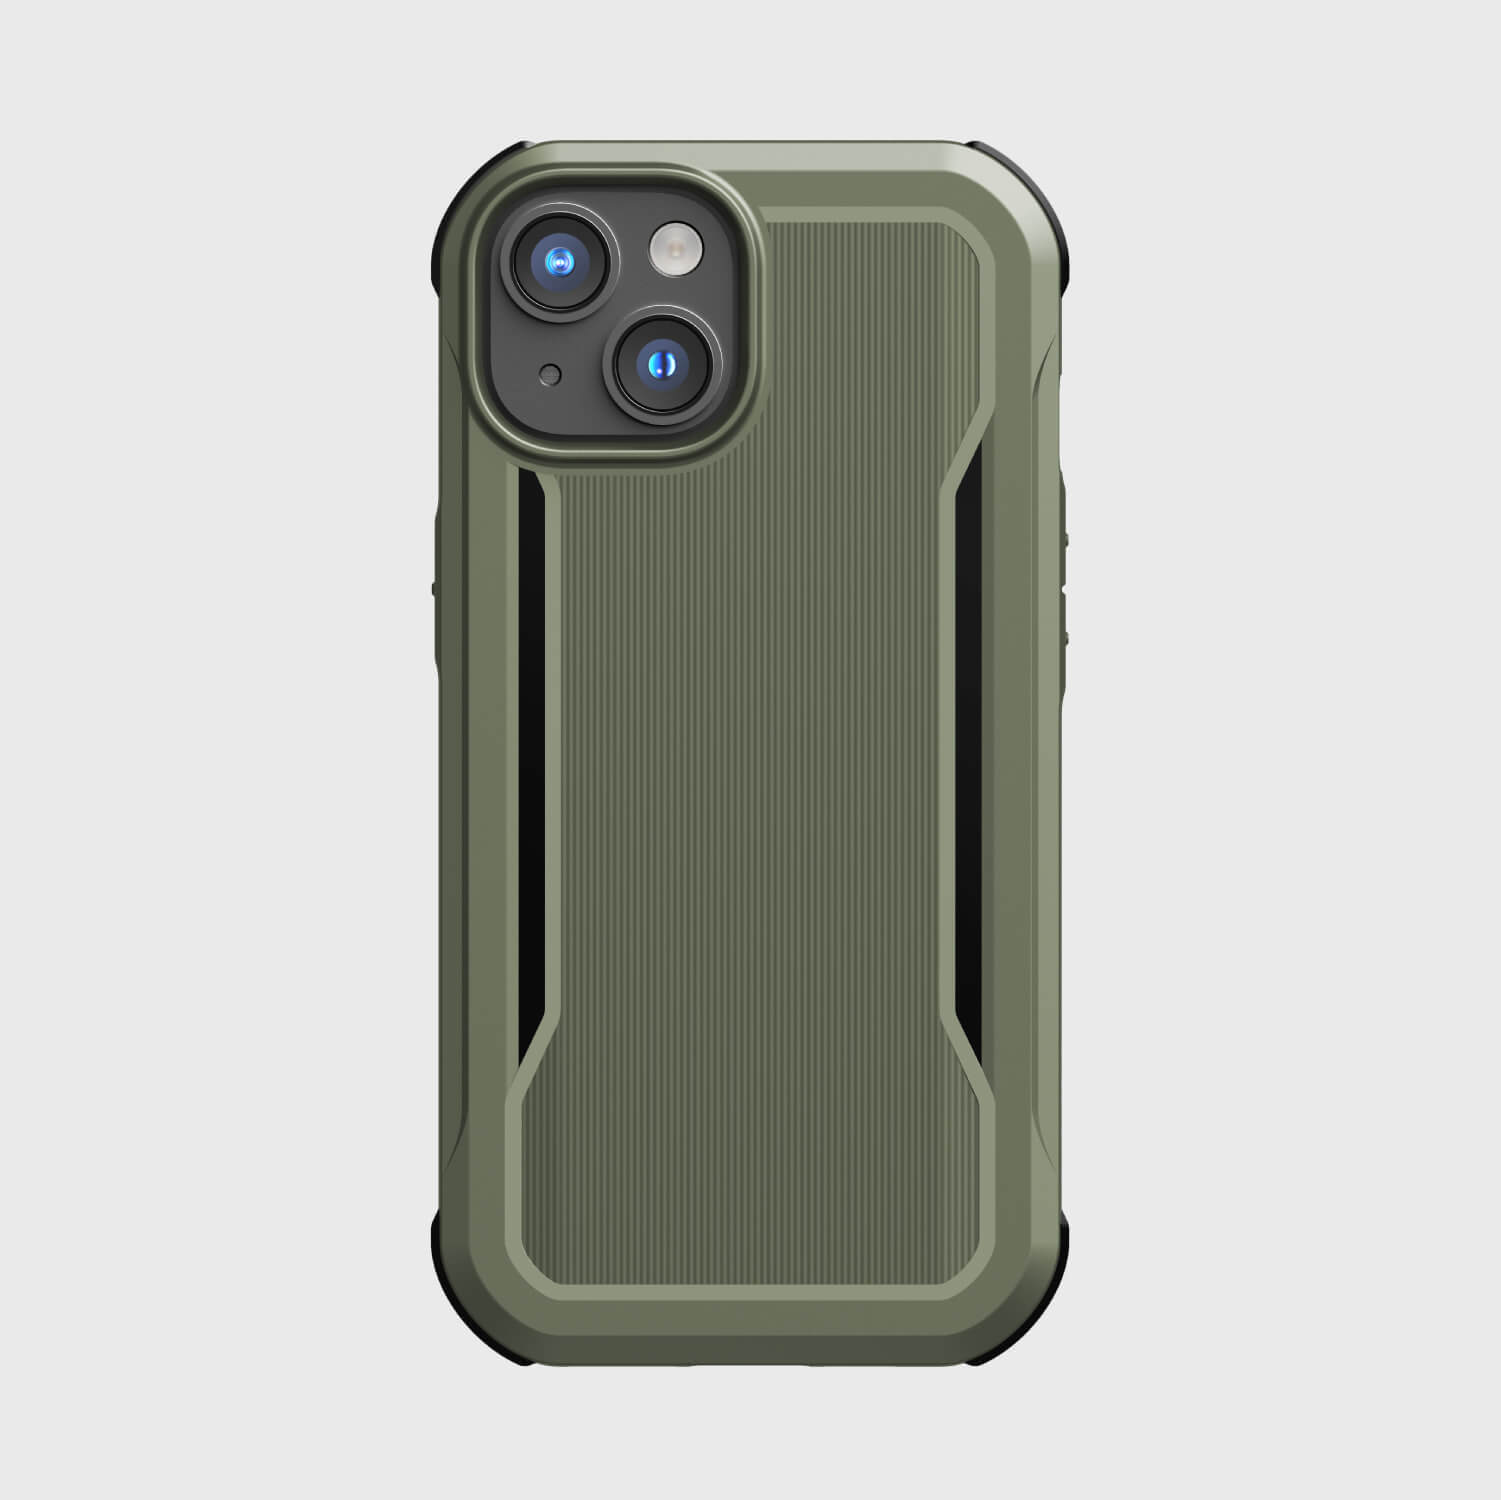 The olive green iPhone 14 Case - Fort Built for MagSafe, offered by Raptic, is offering military-grade drop protection and MagSafe compatibility.